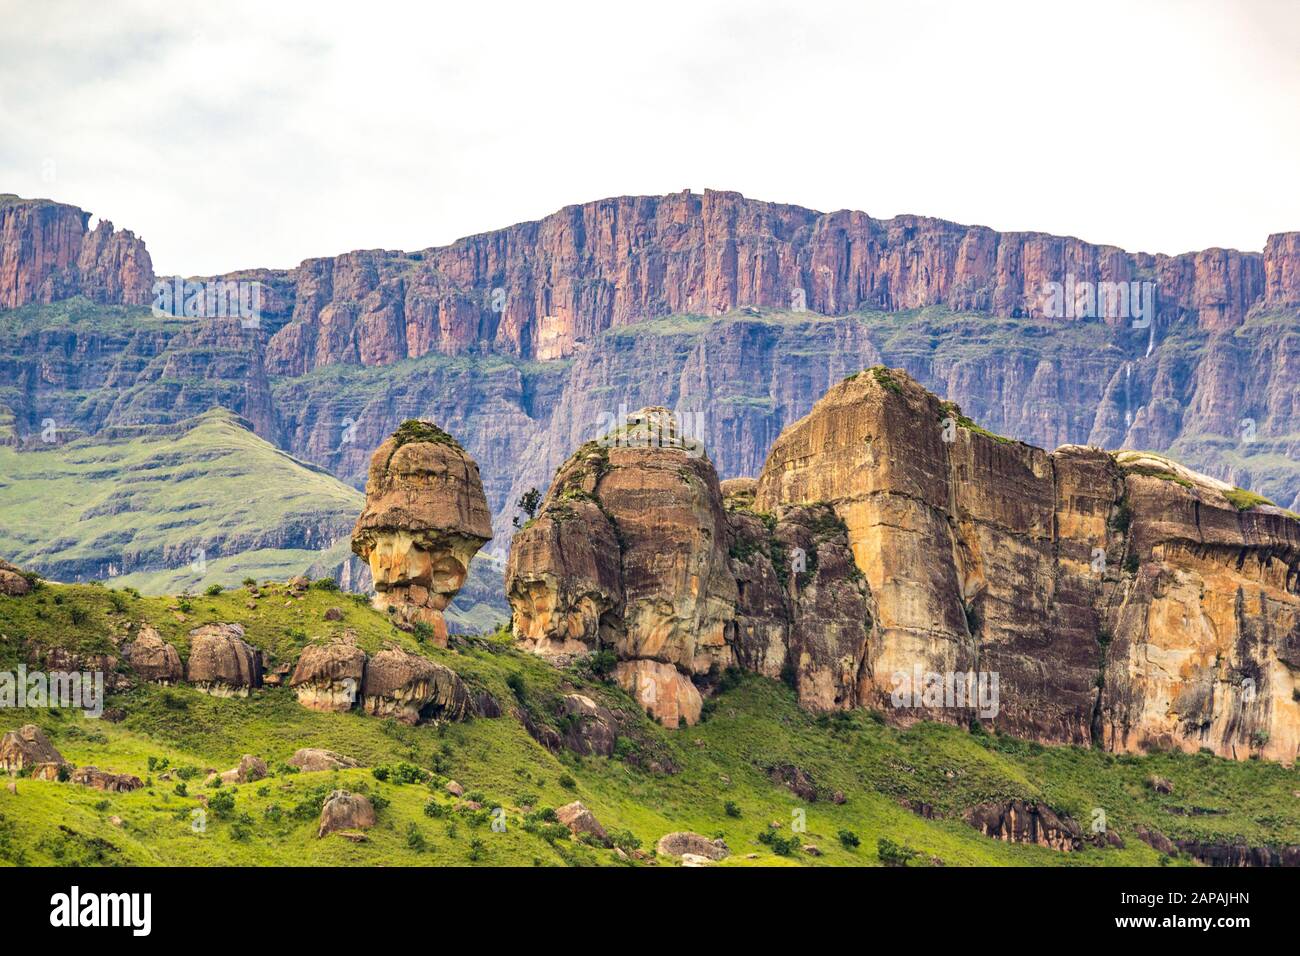 View to the rock formation Policeman's Helmet and the steep cliff faces of the Amphitheatre, Drakensberg mountains, Royal Natal National Park, South A Stock Photo